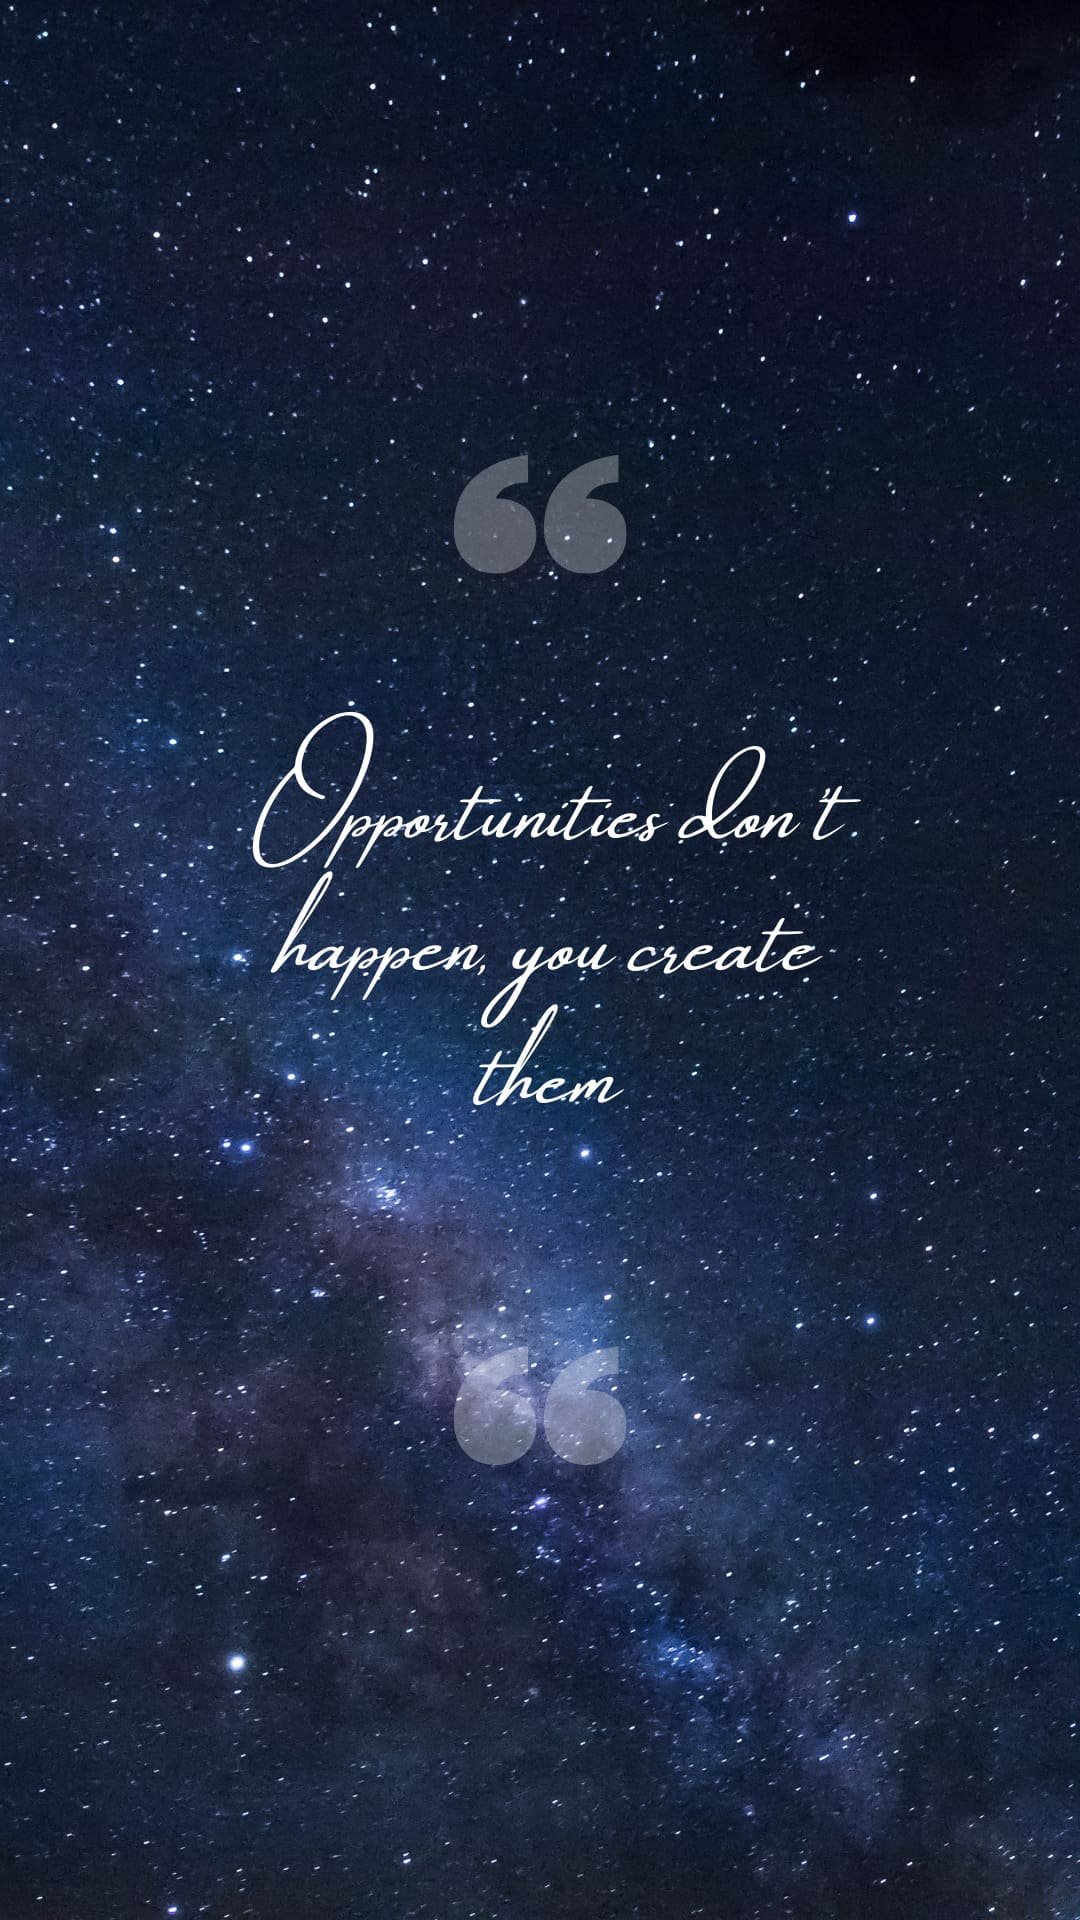 Opportunities dont happen you create themiphone 13 pro max wallpaper